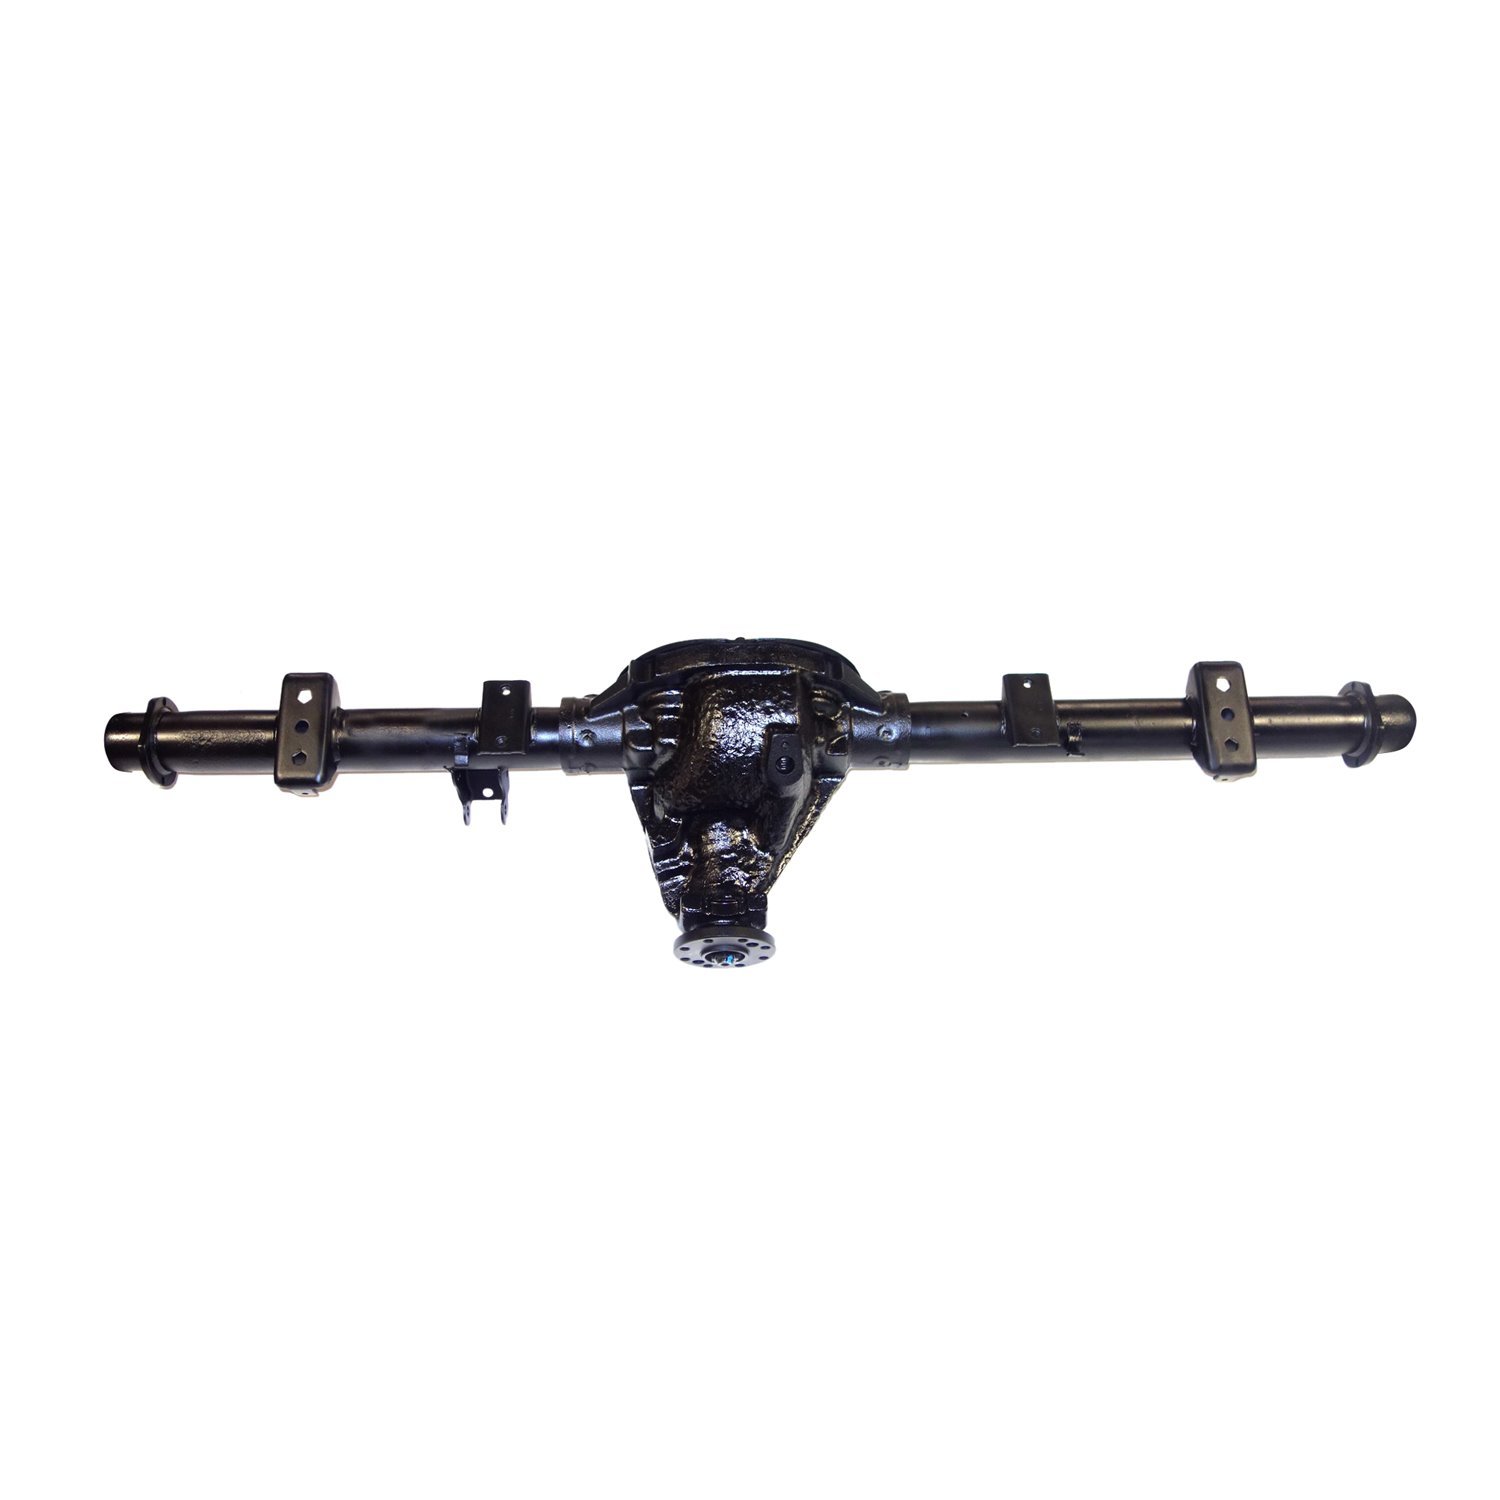 Remanufactured Axle Assy for Chy 8.25" 04-05 Durango 3.55 , 4x4 w/o Traction Control